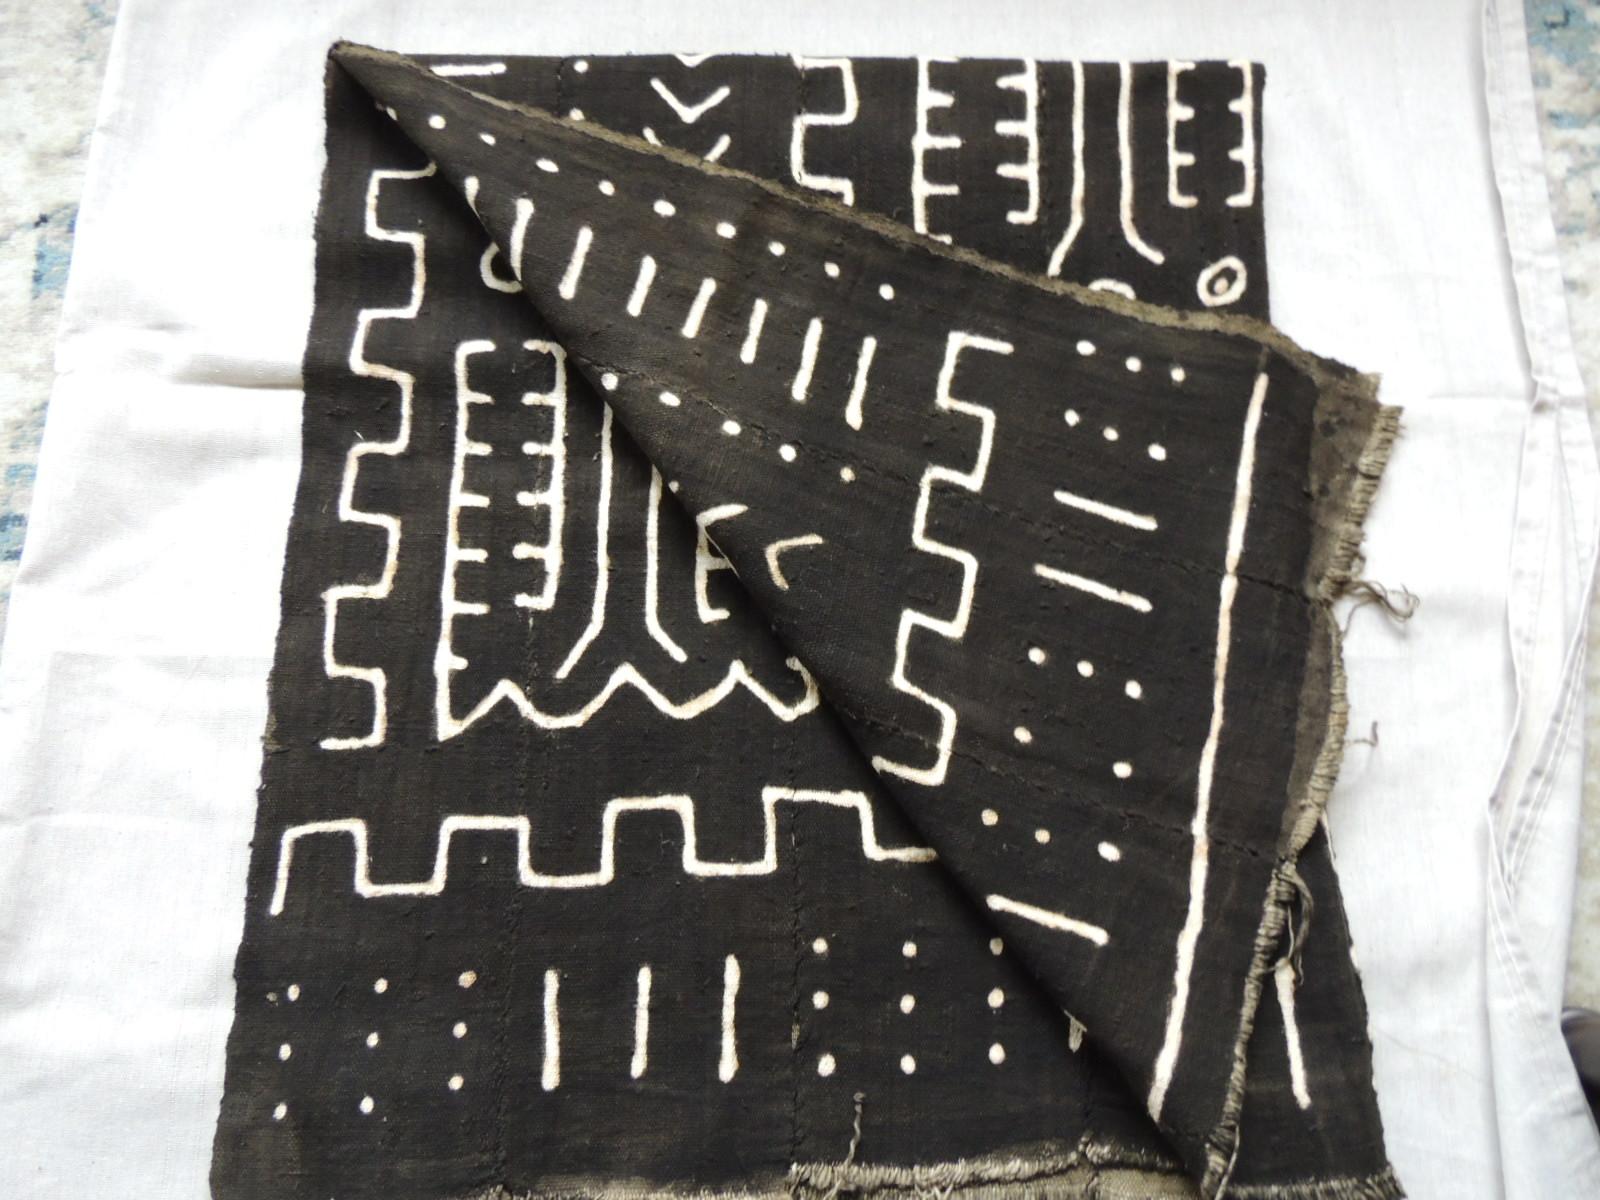 Vintage graphic Bogolanfini African mud cloth panel
Vintage Graphic black and natural Bogolanfini African mud cloth panel. Bolt pattern. 
Bògòlanfini or bogolan (Bambara: is a handmade Malian cotton fabric traditionally dyed with fermented mud. In